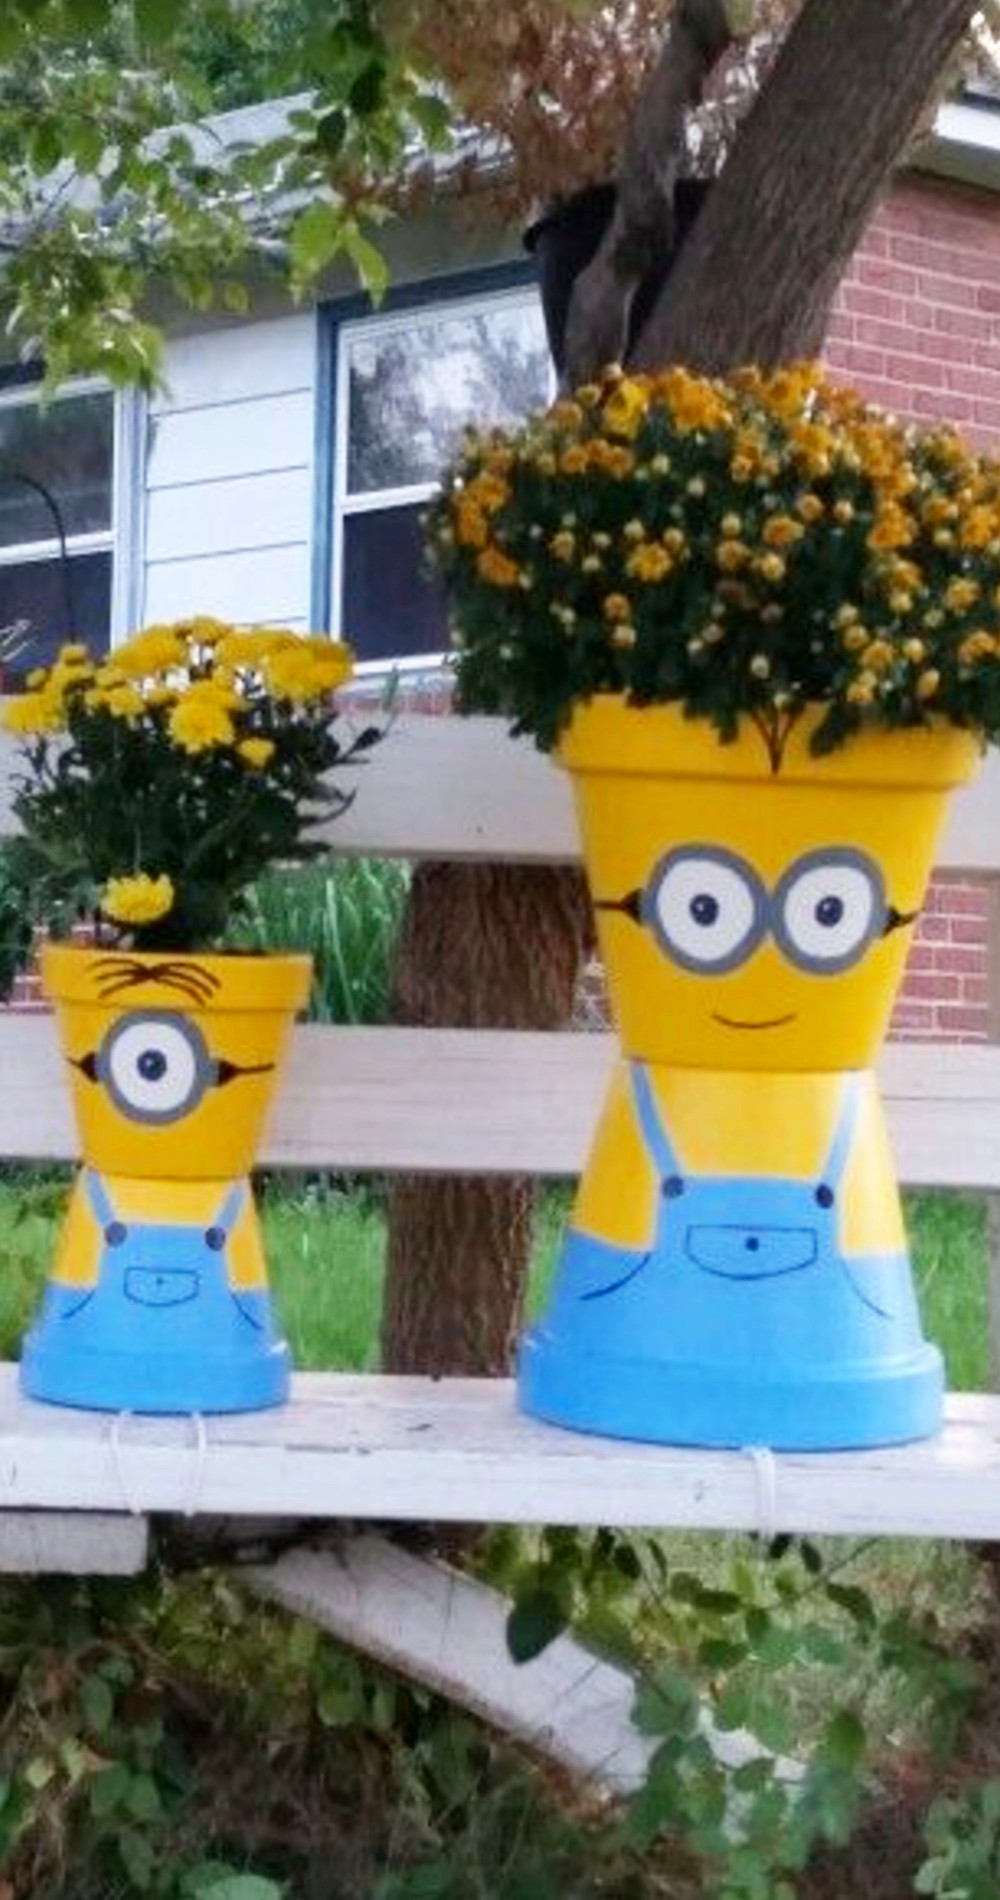 Super Cute Minion Crafts - Flower Pots Painted Like Minions (flower pot people too!)